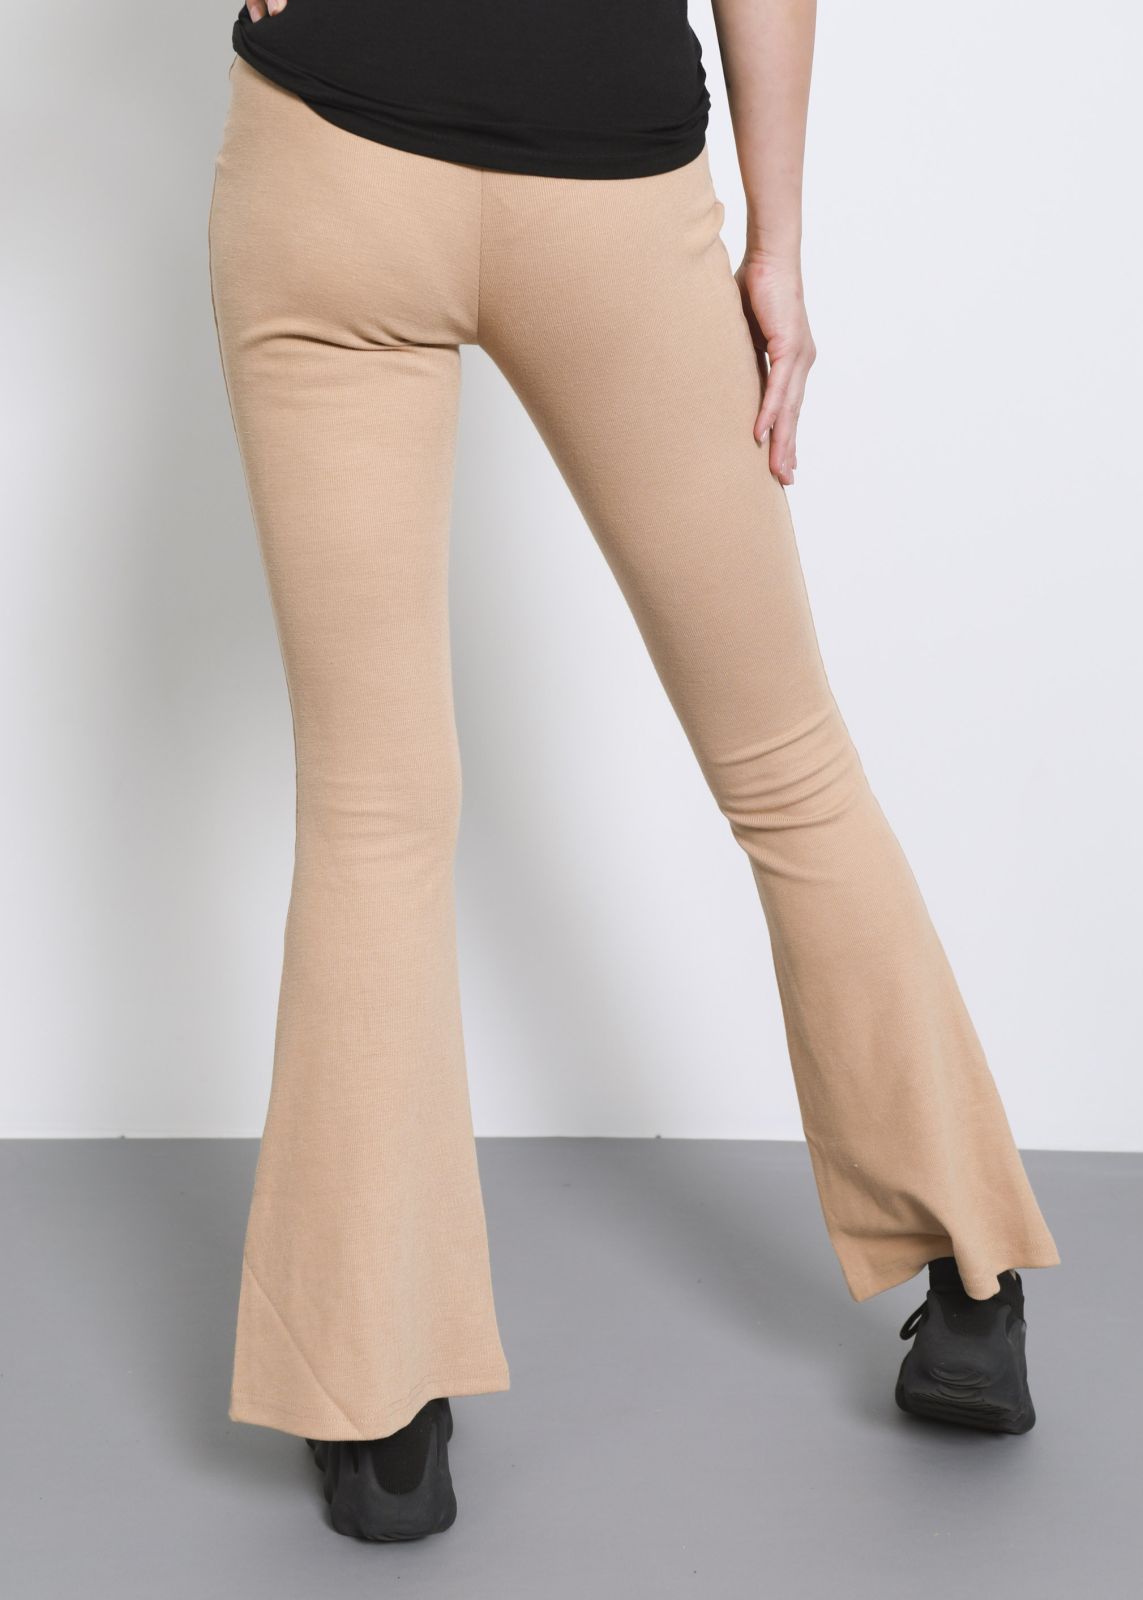 Top more than 118 boot cut trousers womens latest